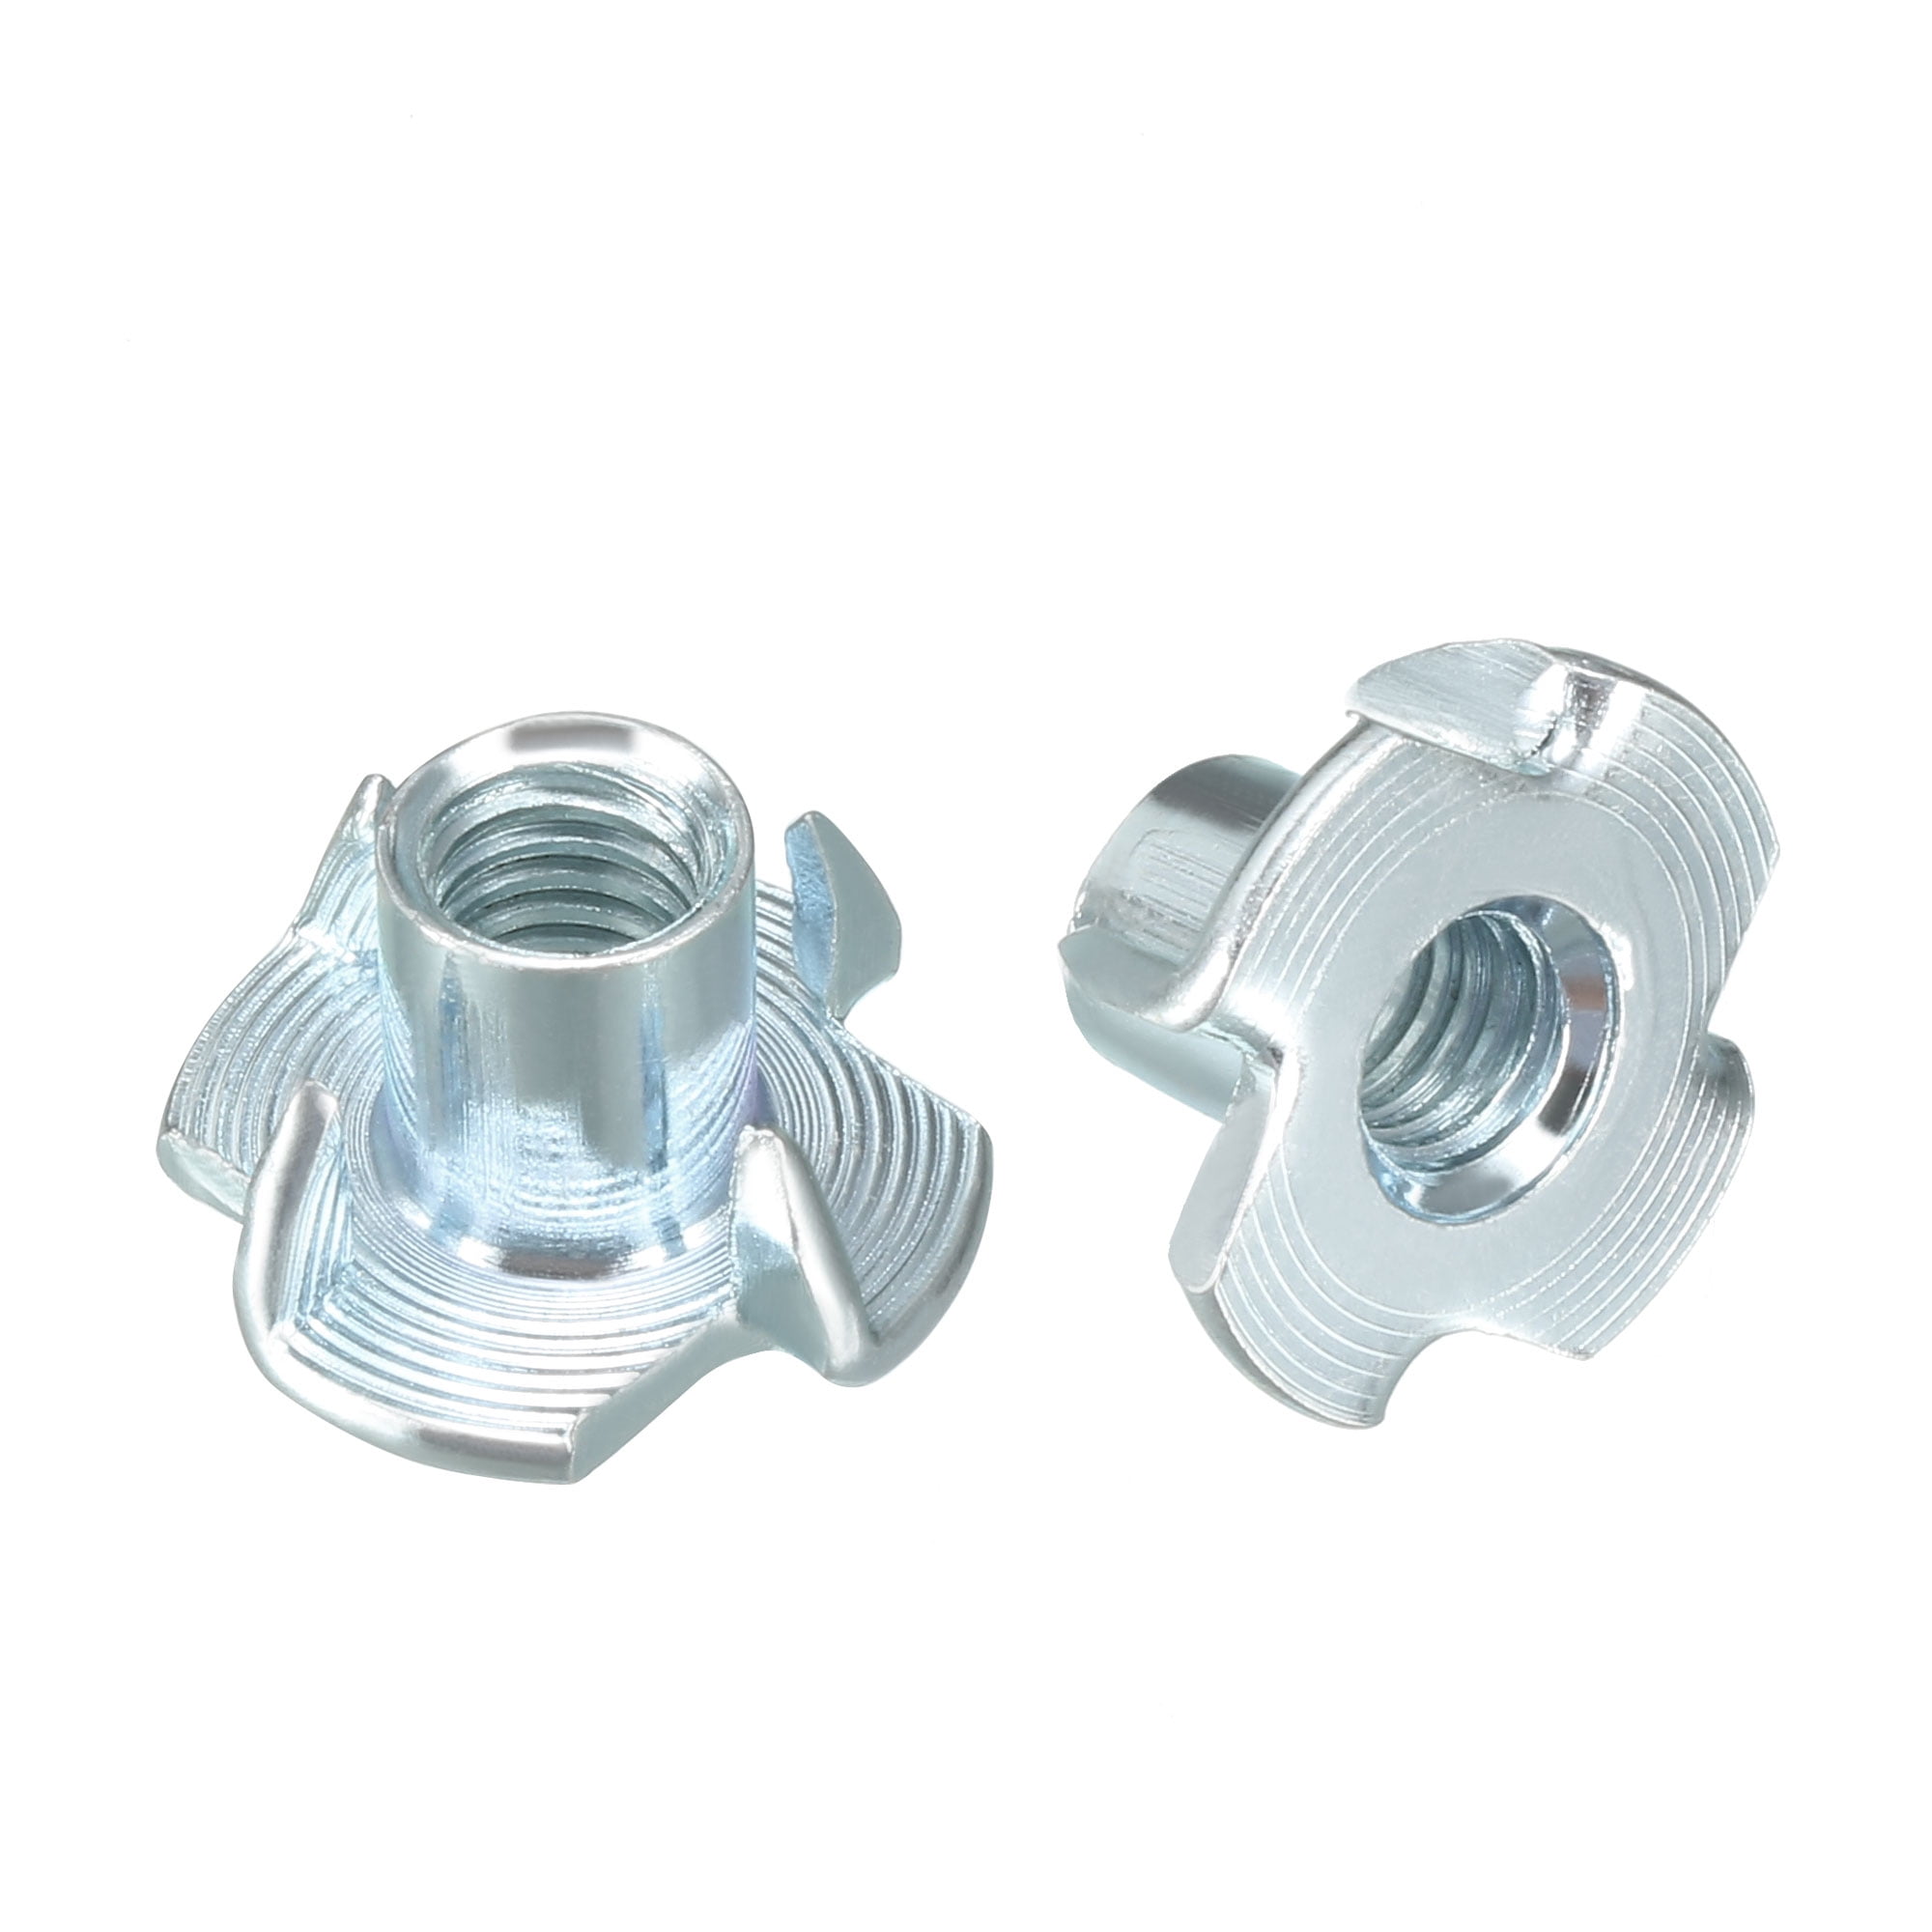 Set of 50 4 Pronged Zinc Plated Steel T-Nut for Rock Climbing Holds Wood Parts 